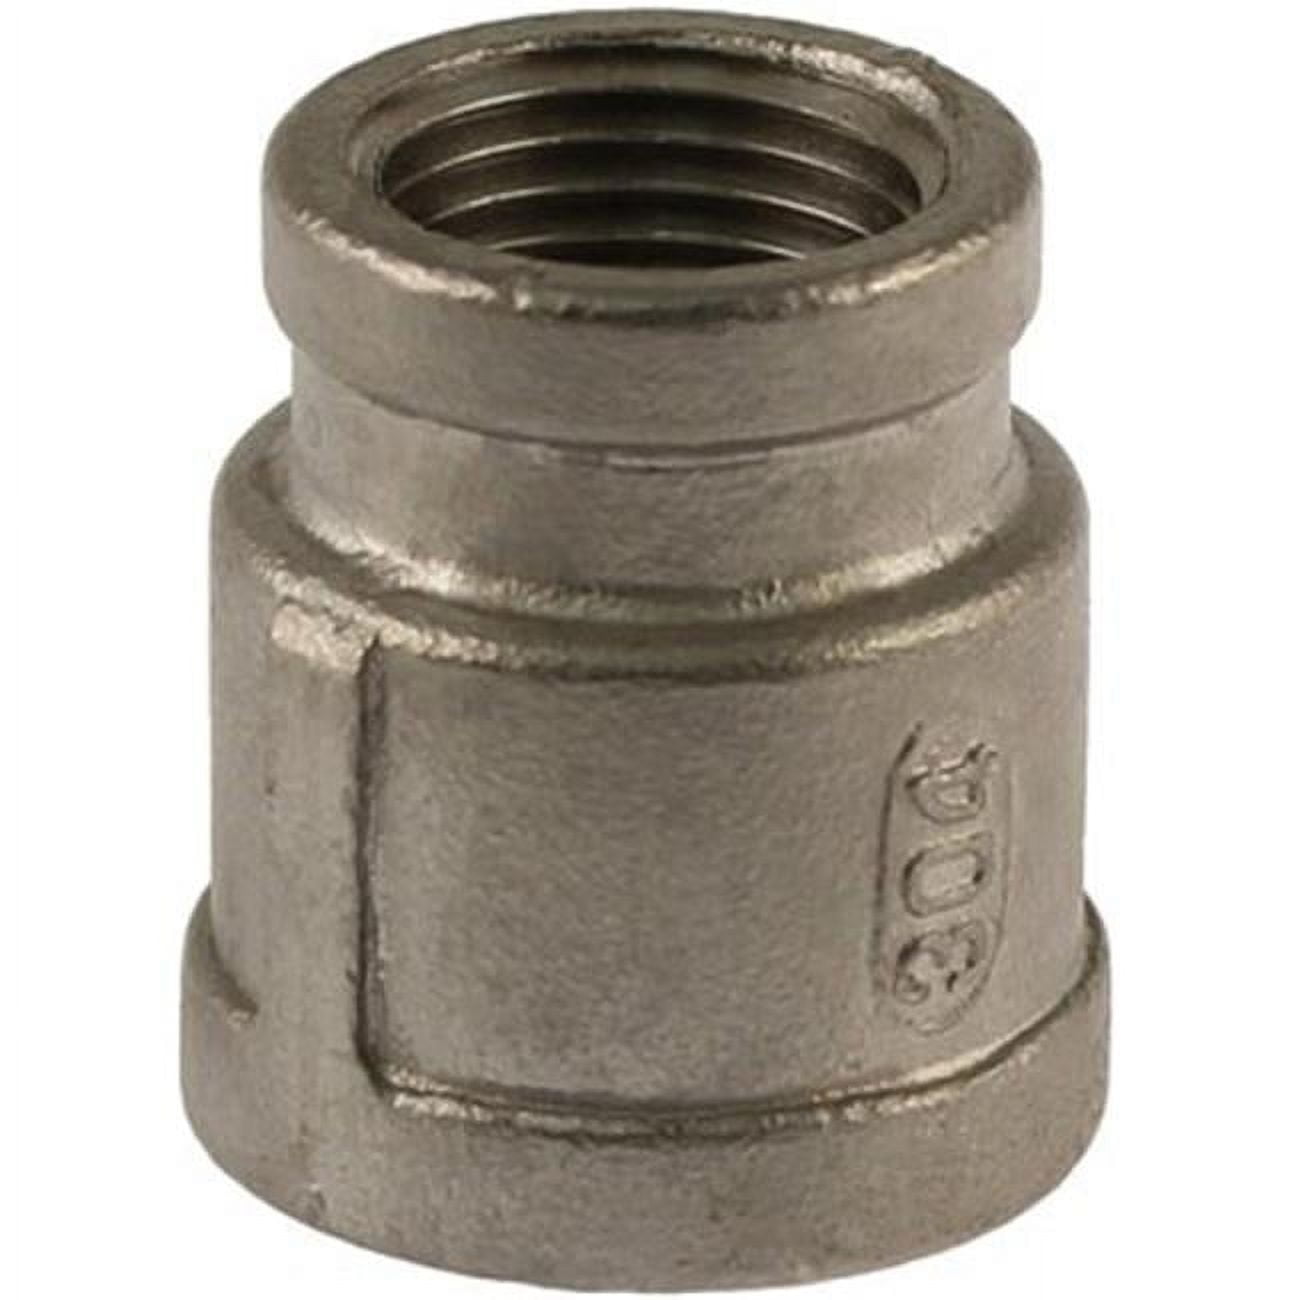 2-ssrc-1210 1.25 X 1 In. 304 Stainless Steel Coupling, Red